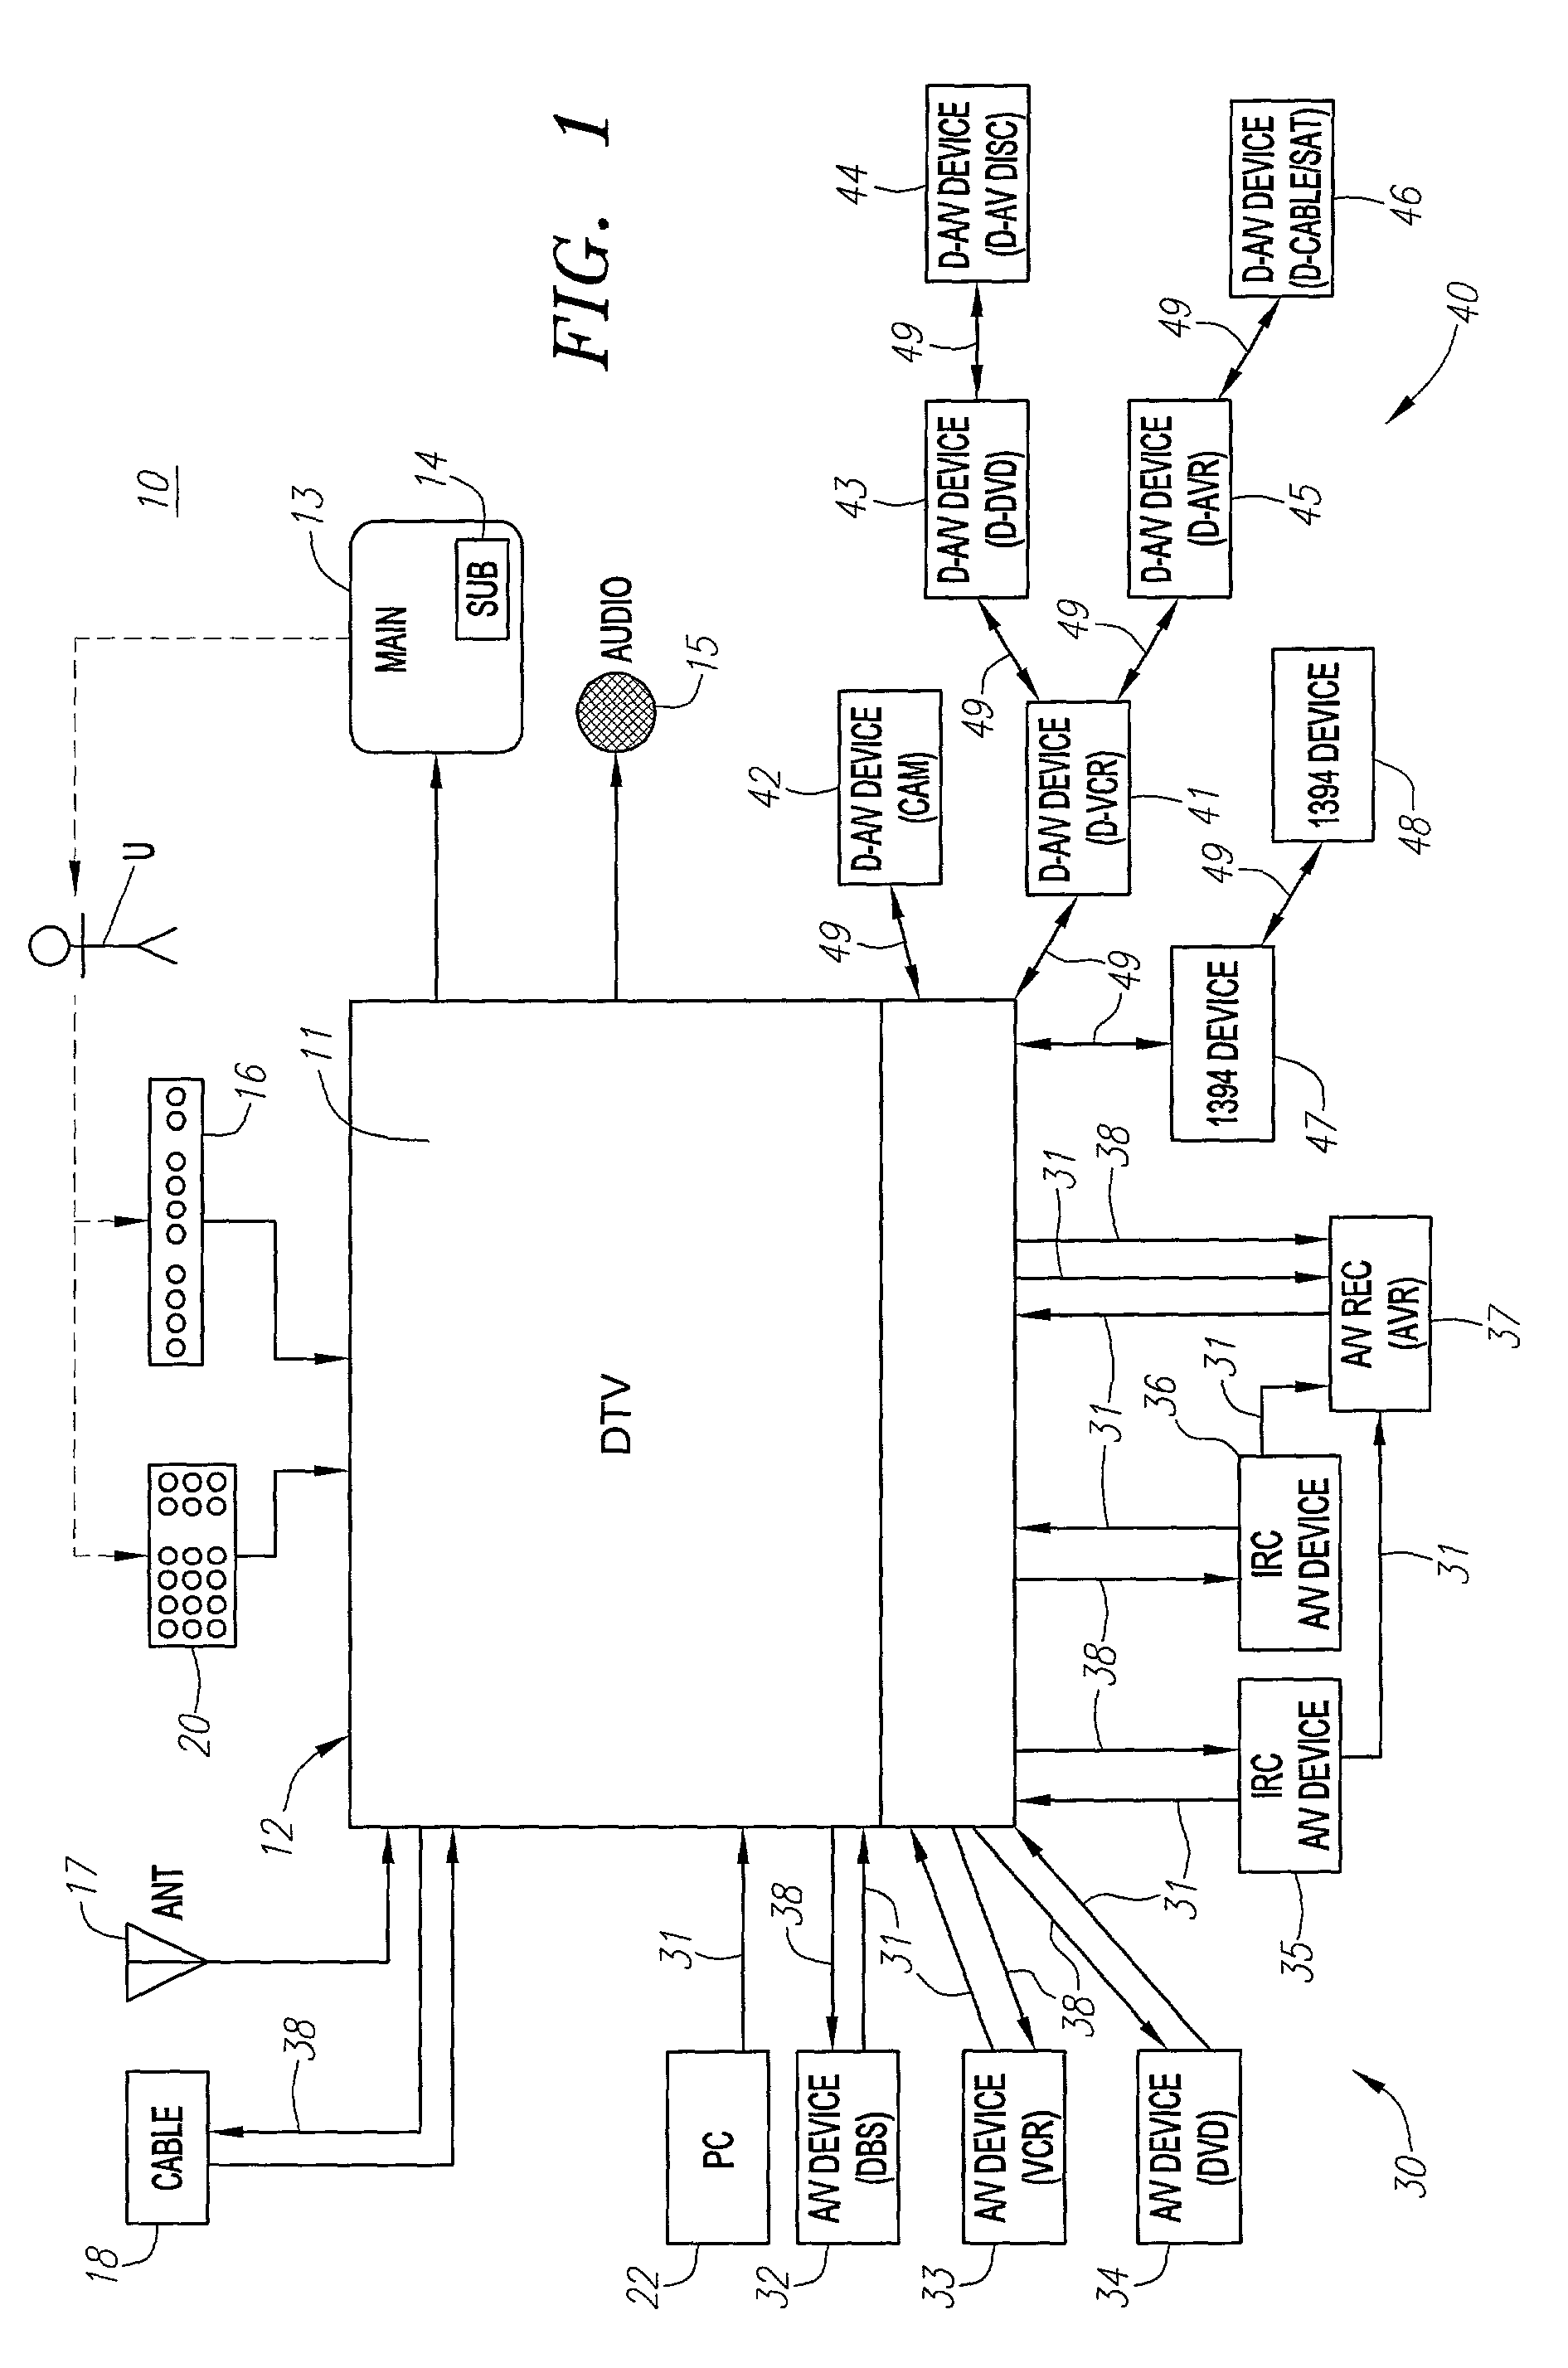 Control system and user interface for network of input devices